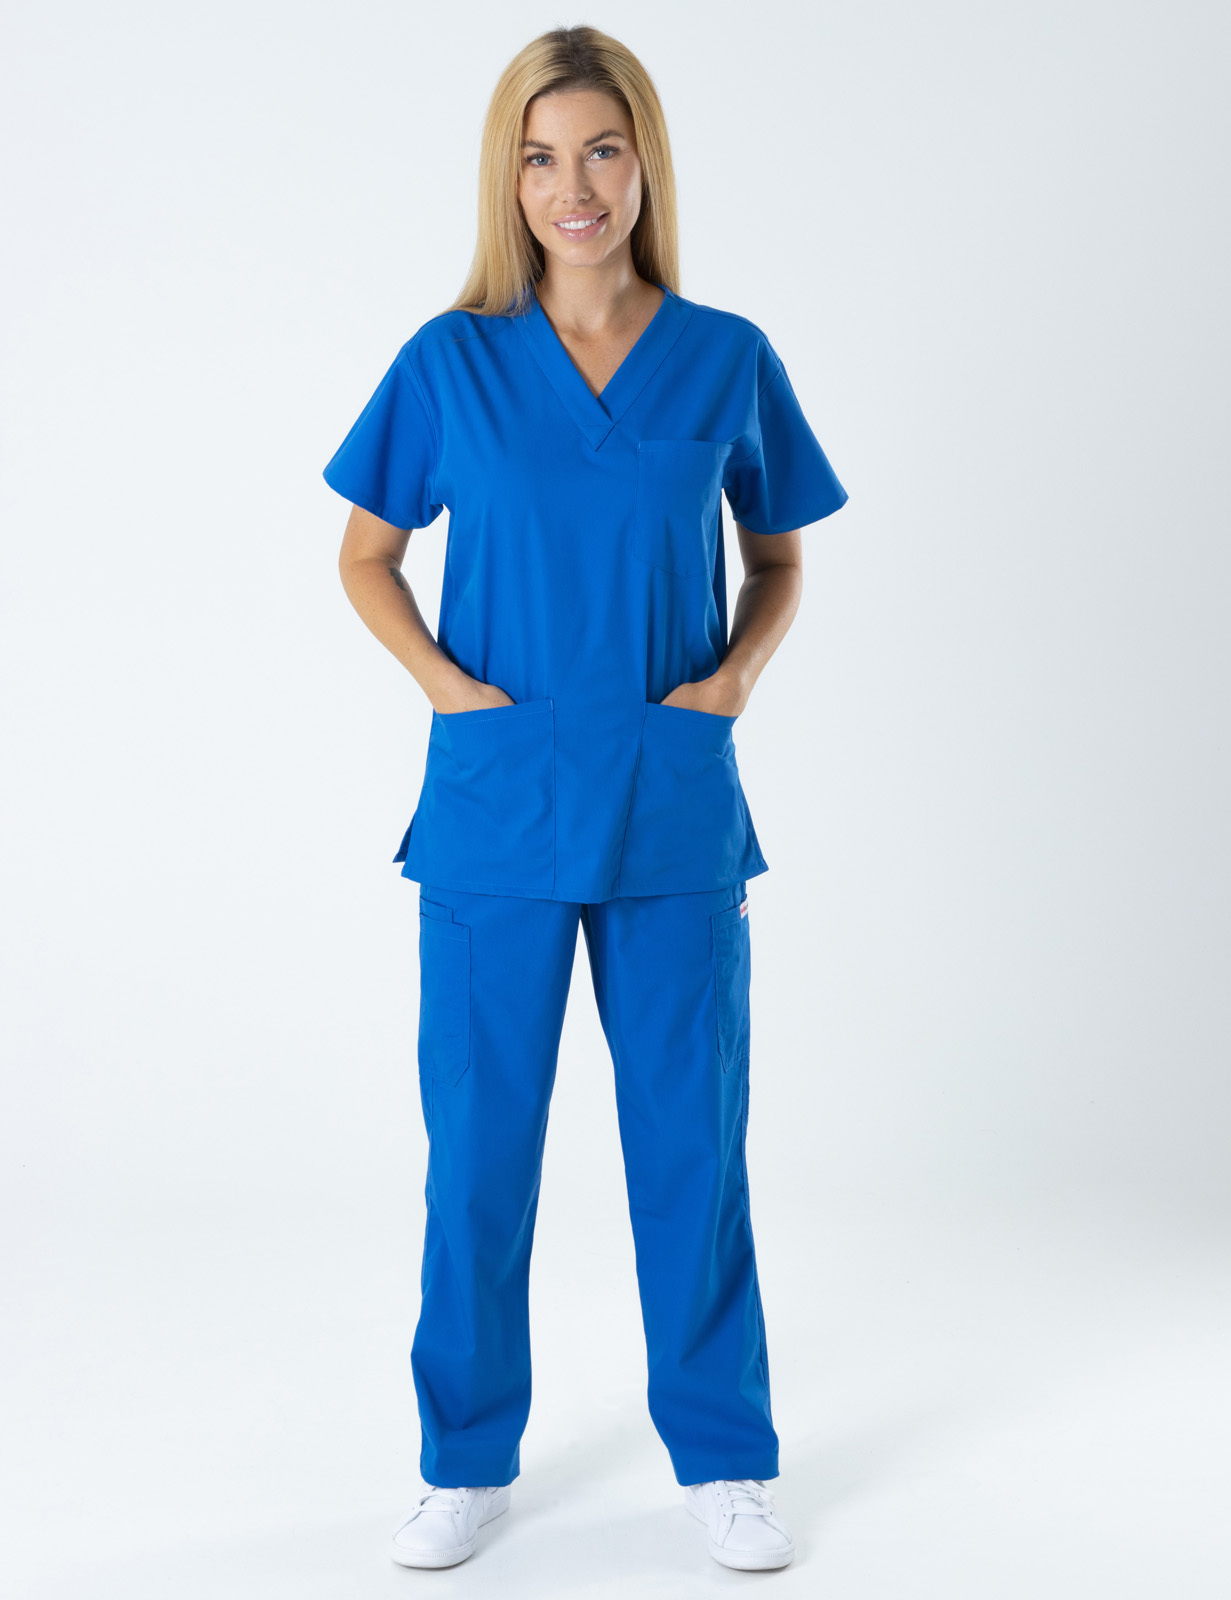 Toowoomba Hospital - Doctor (4 Pocket Scrub Top and Cargo Pants in Royal incl Logos)